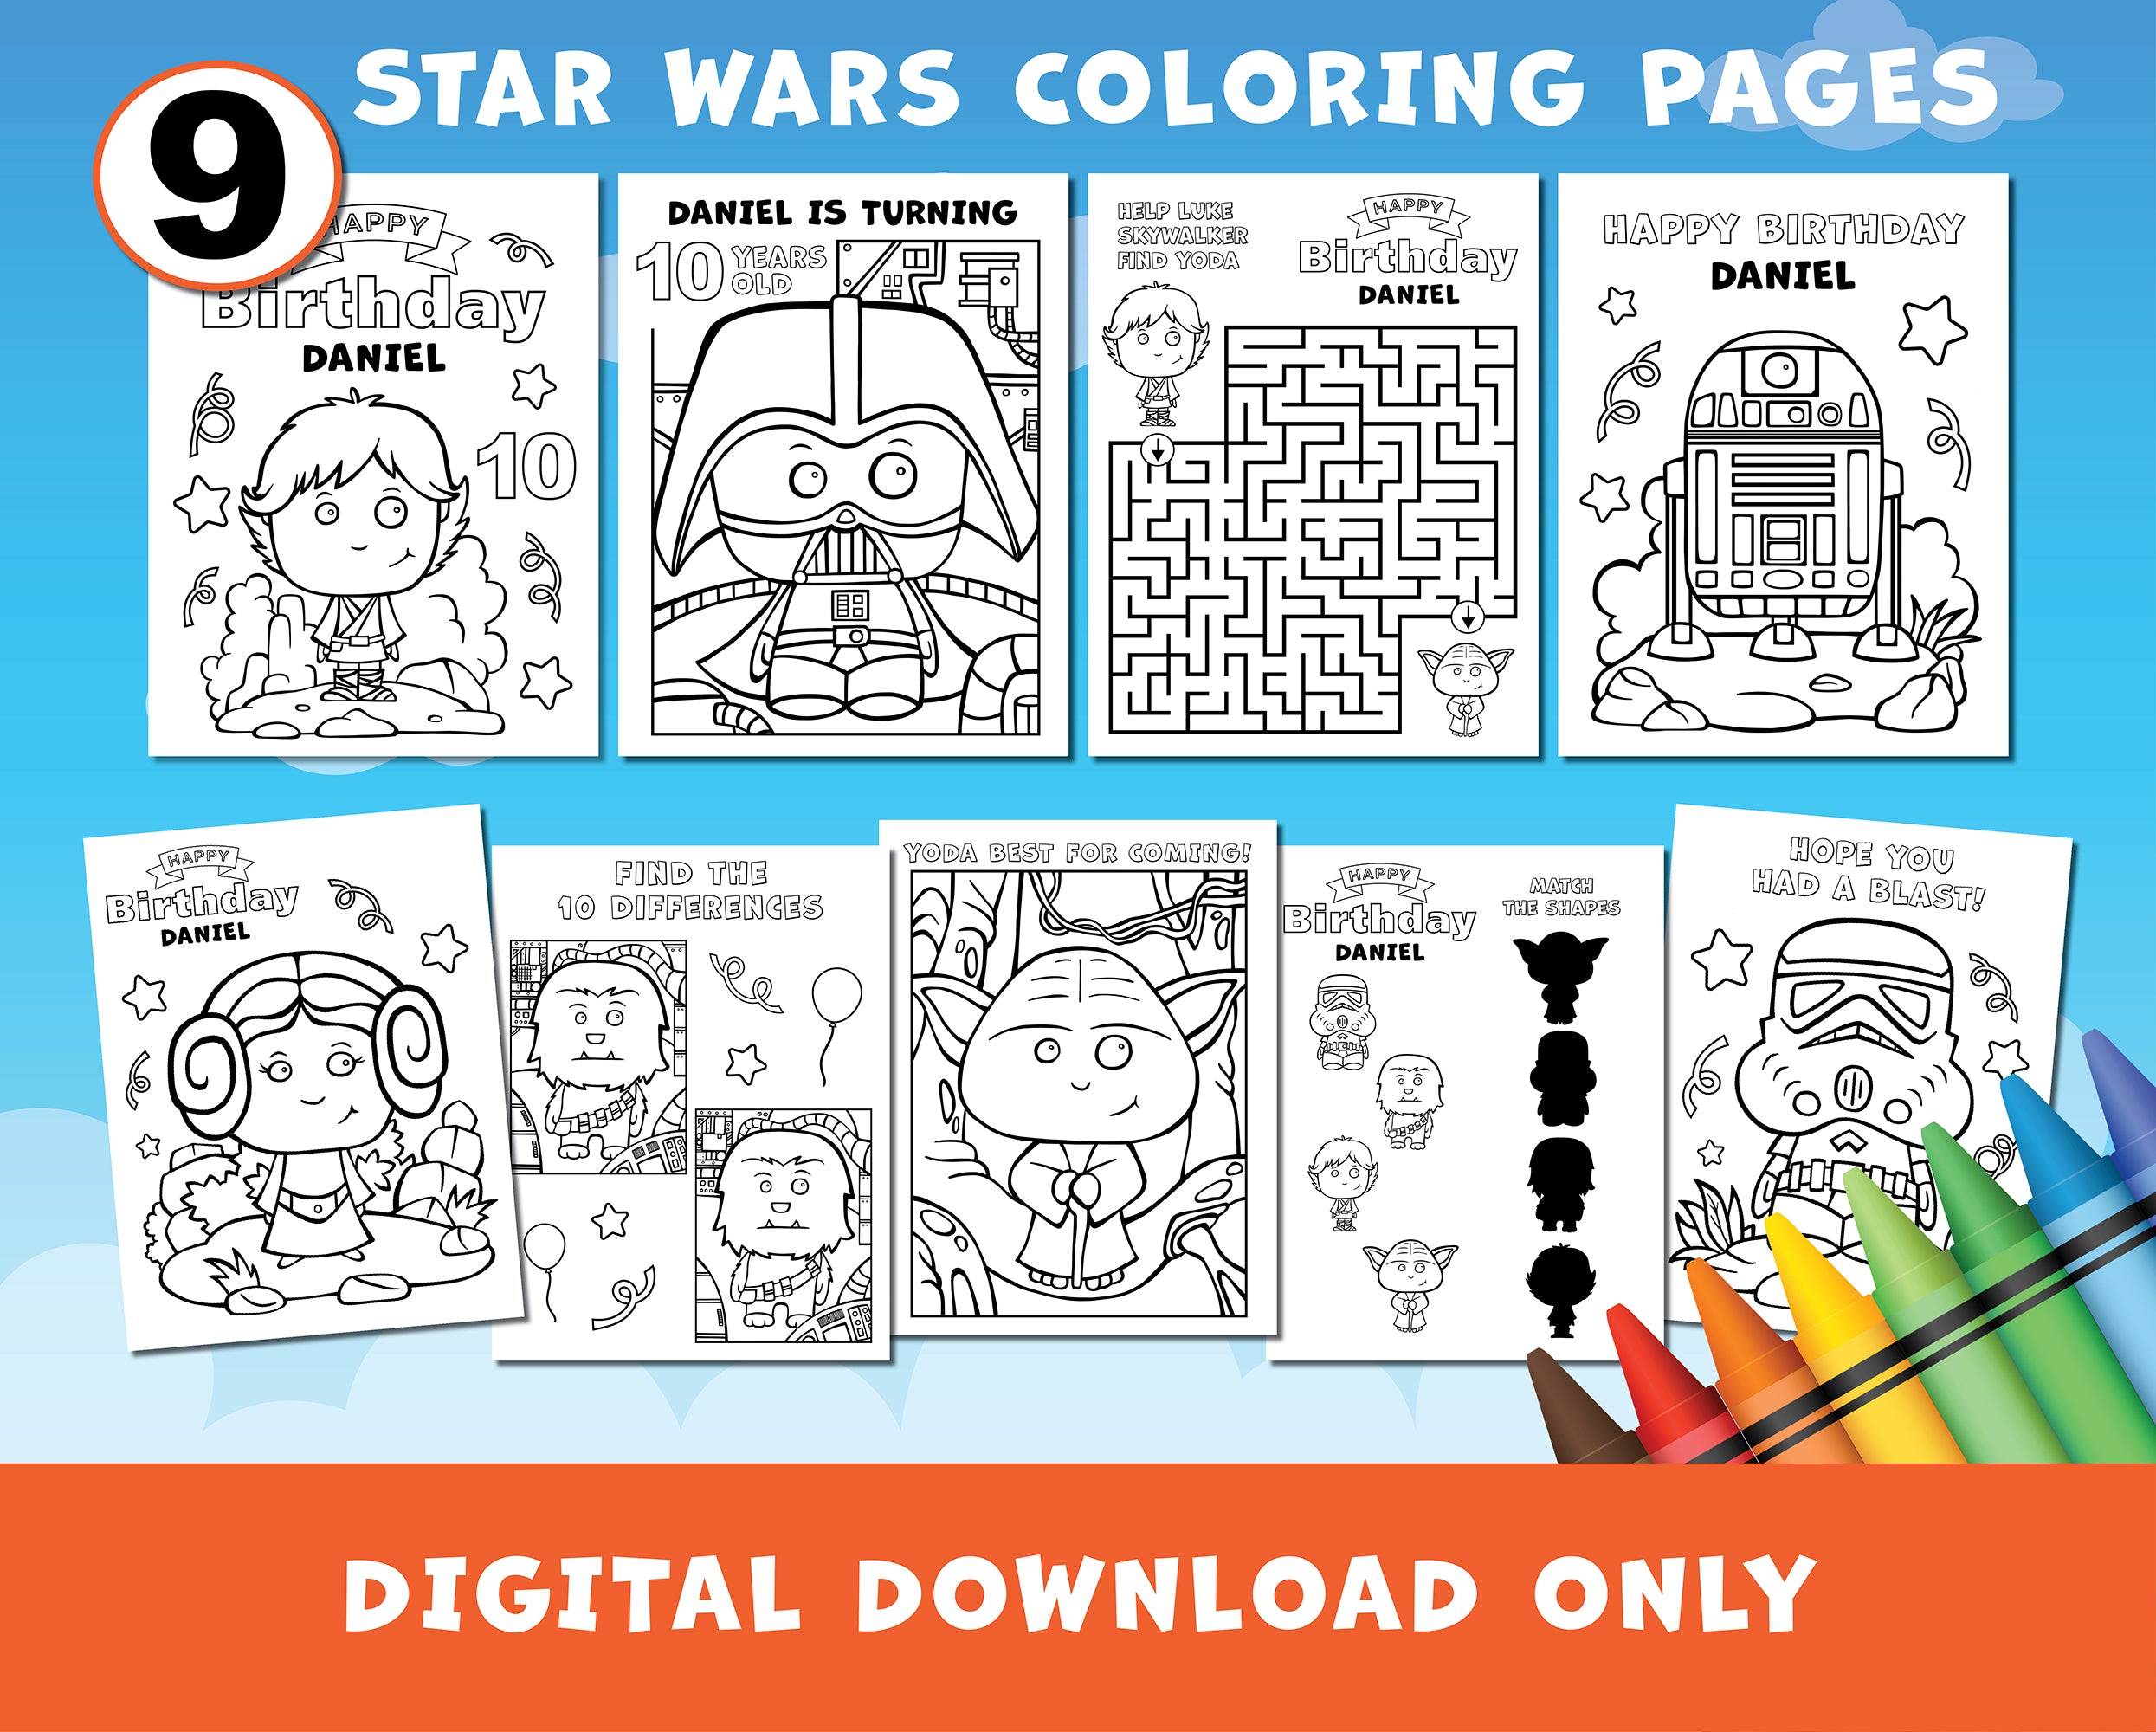 Sci-Fi Birthday Coloring Pages